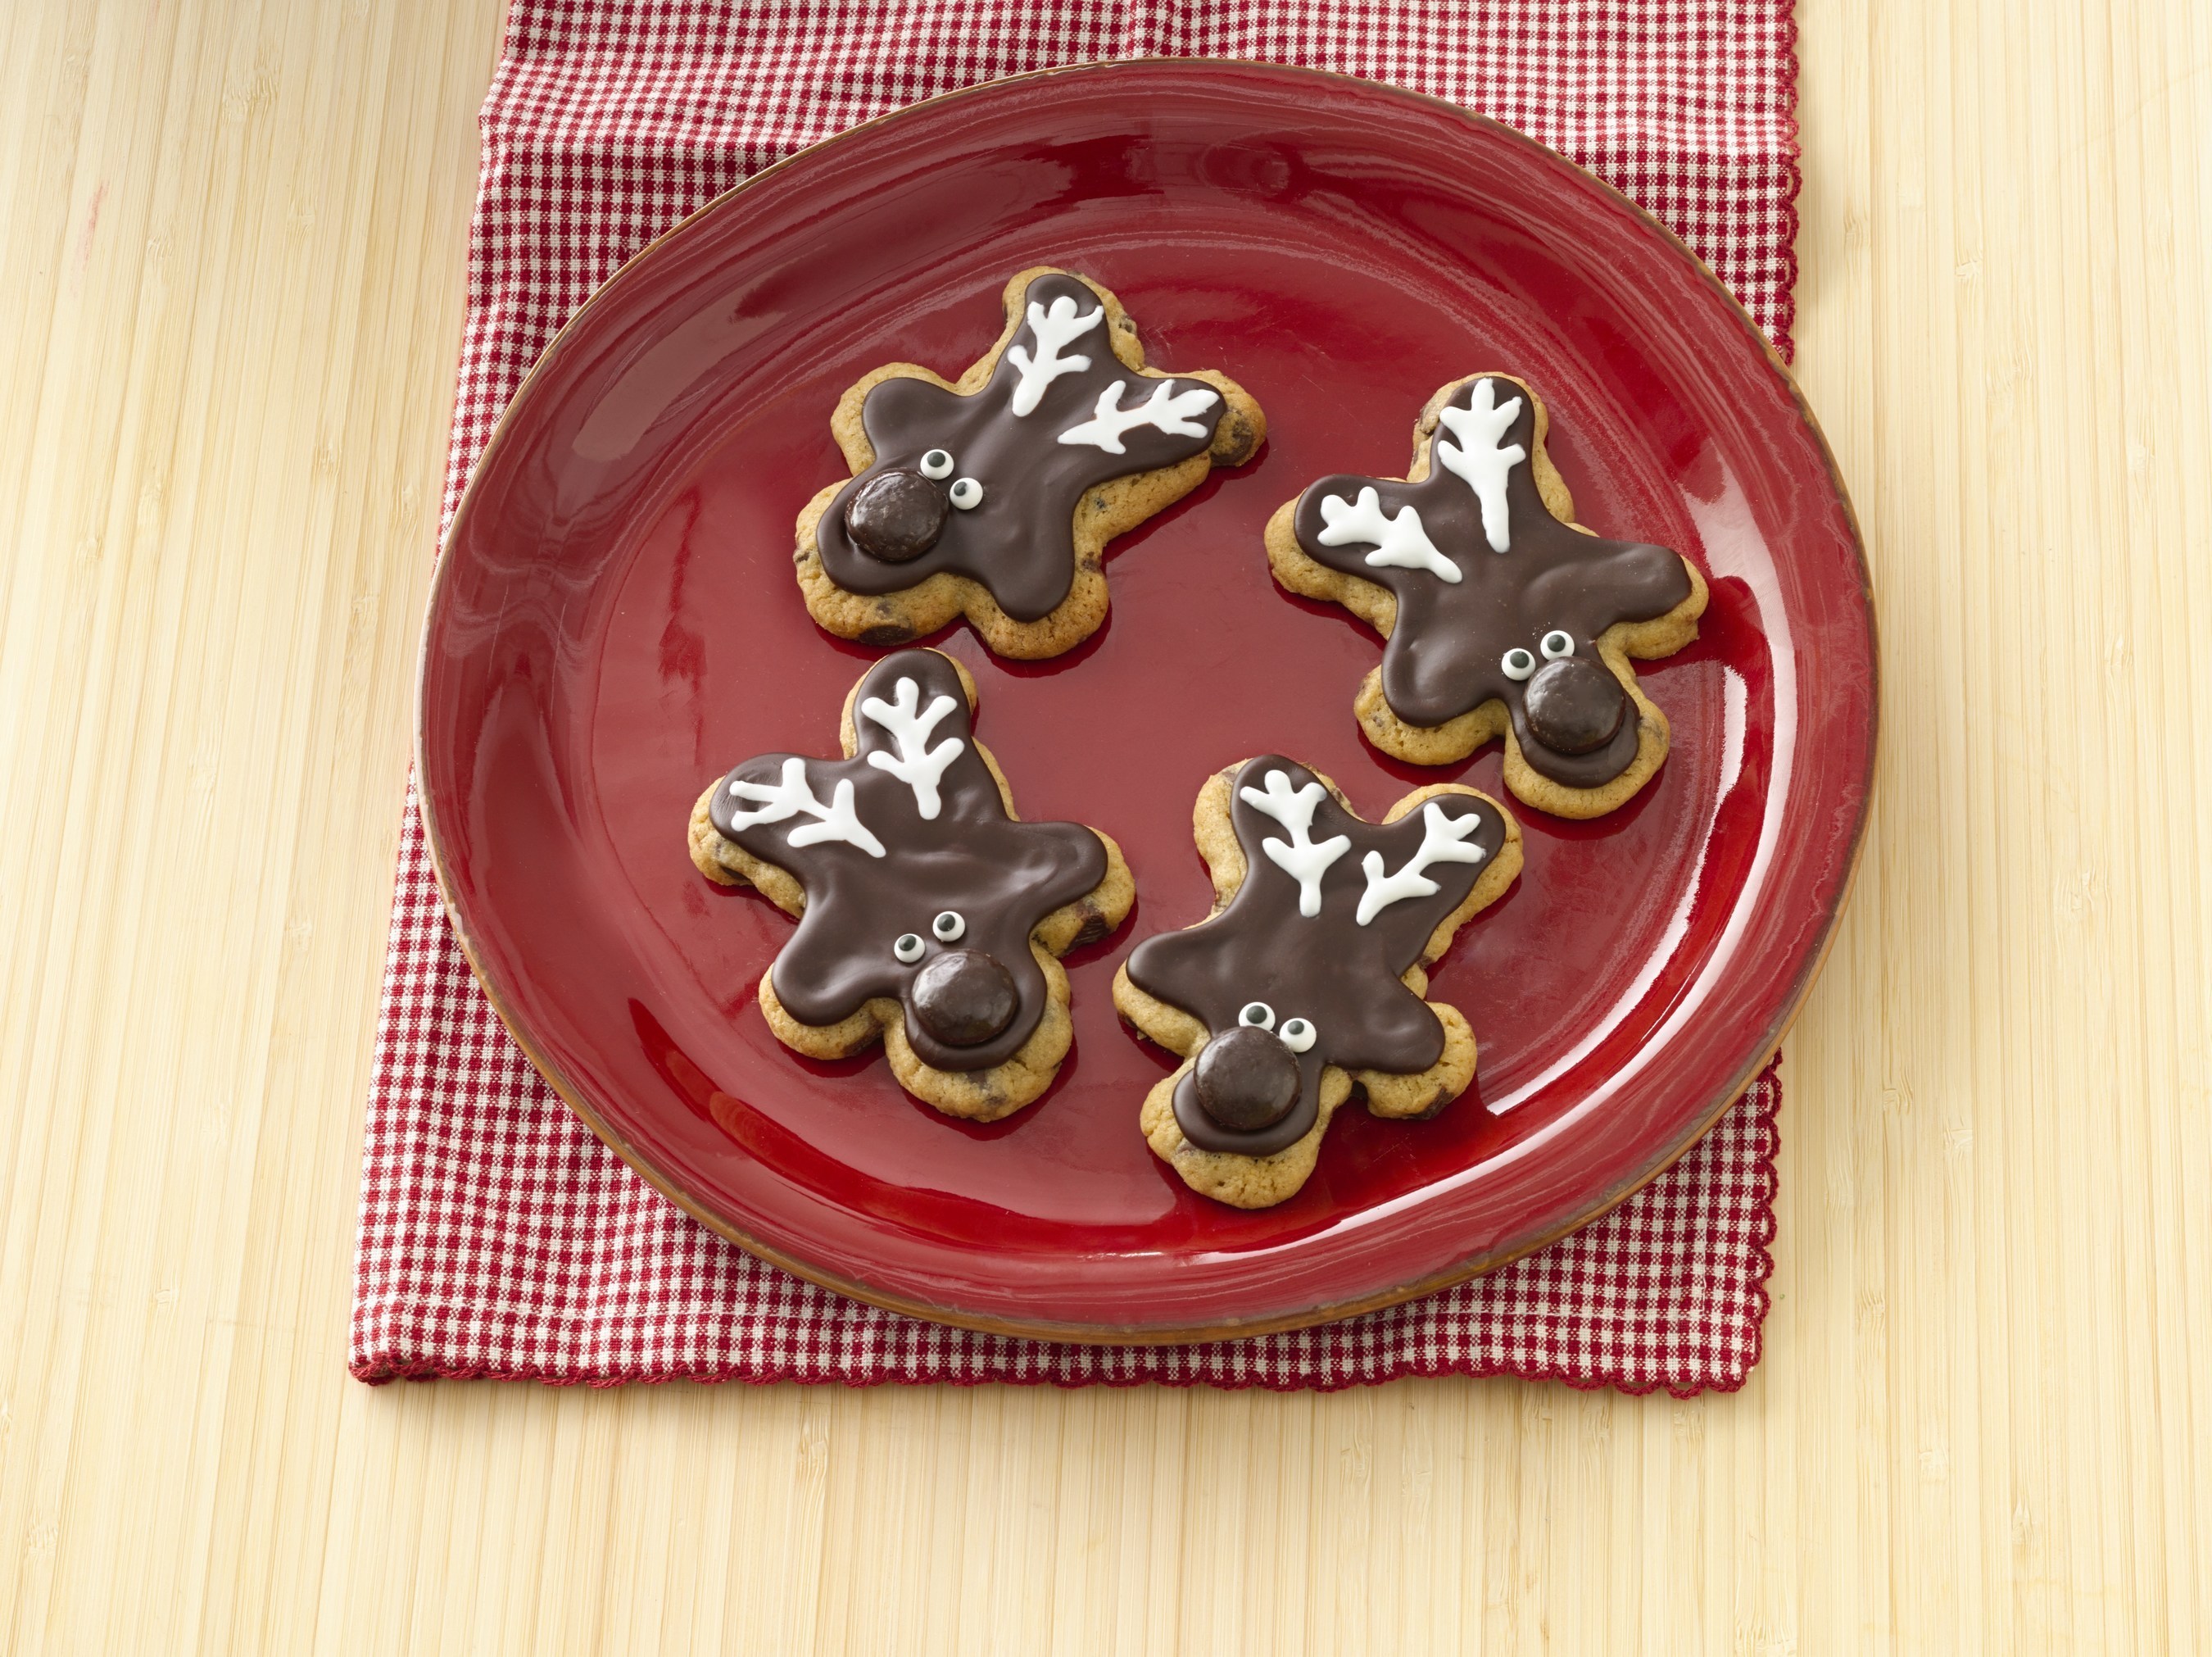 #GetYourBettyOn this holiday season with top cookie recipes for kids and how-to tips at BettyCrocker.com/KidsCookieCorner.